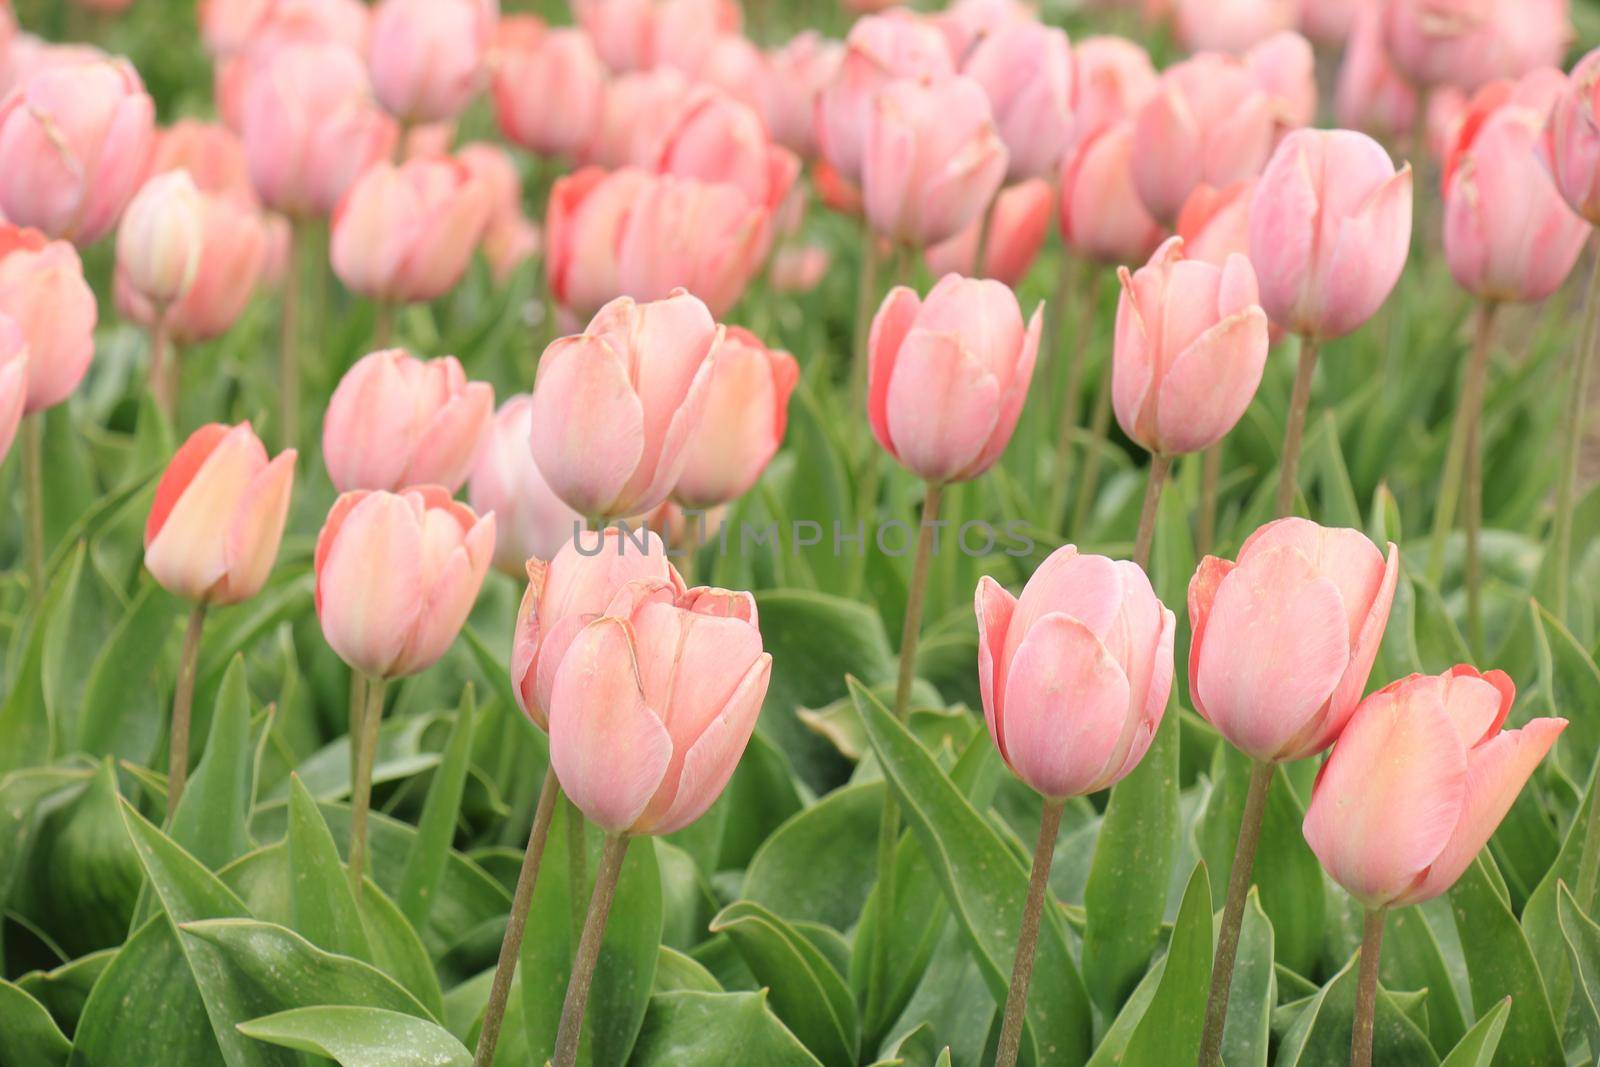 Pink tulips in a field: Tulips growing on an agriculture field by studioportosabbia